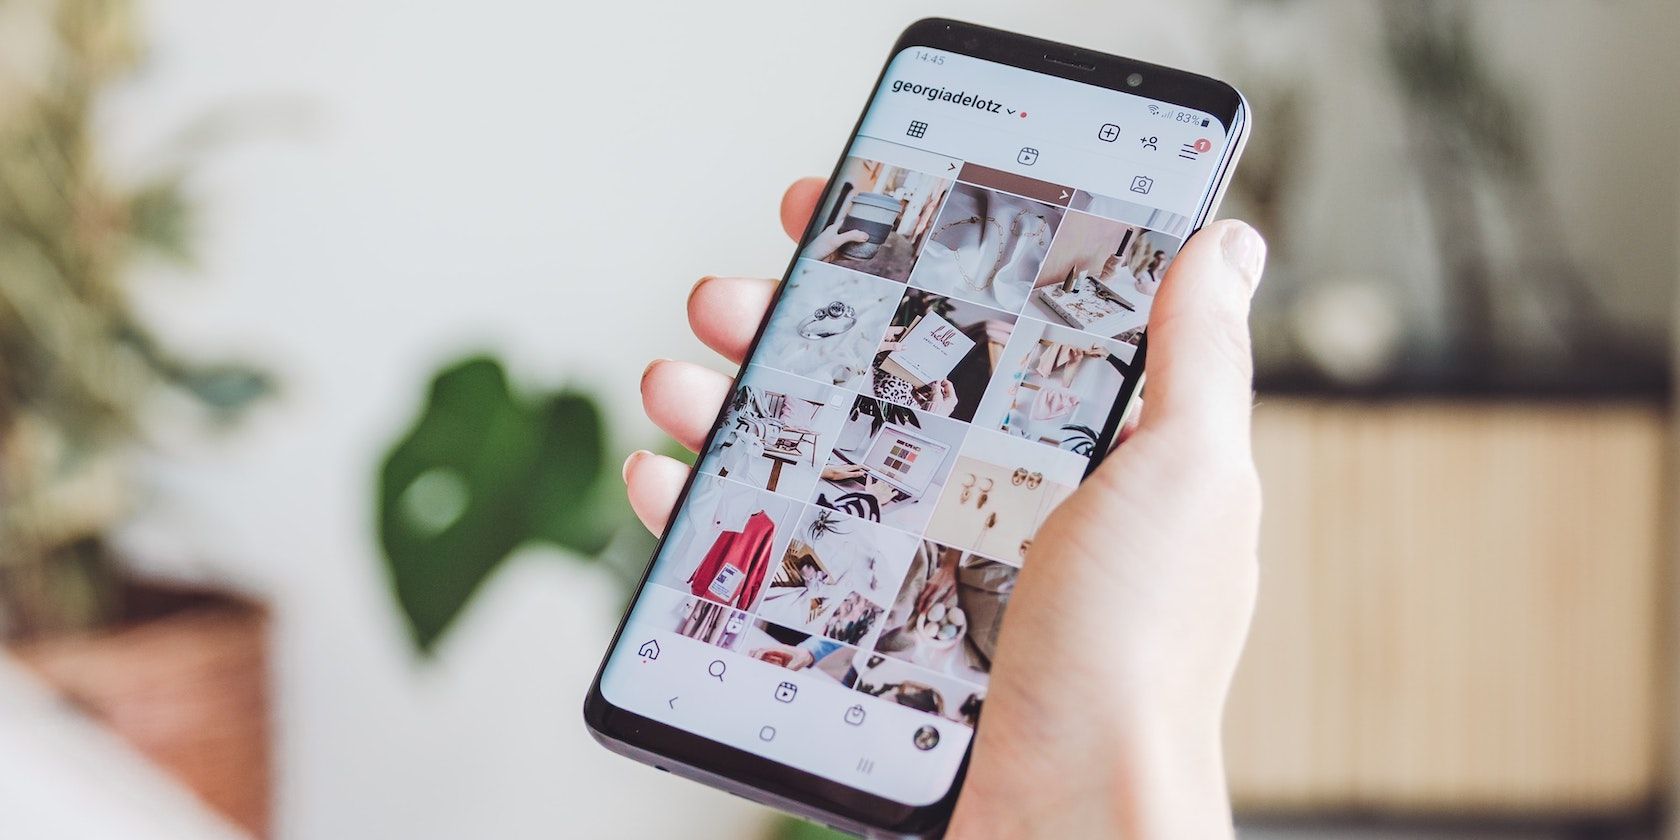 a hand holding a phone, the user is browsing Instagram